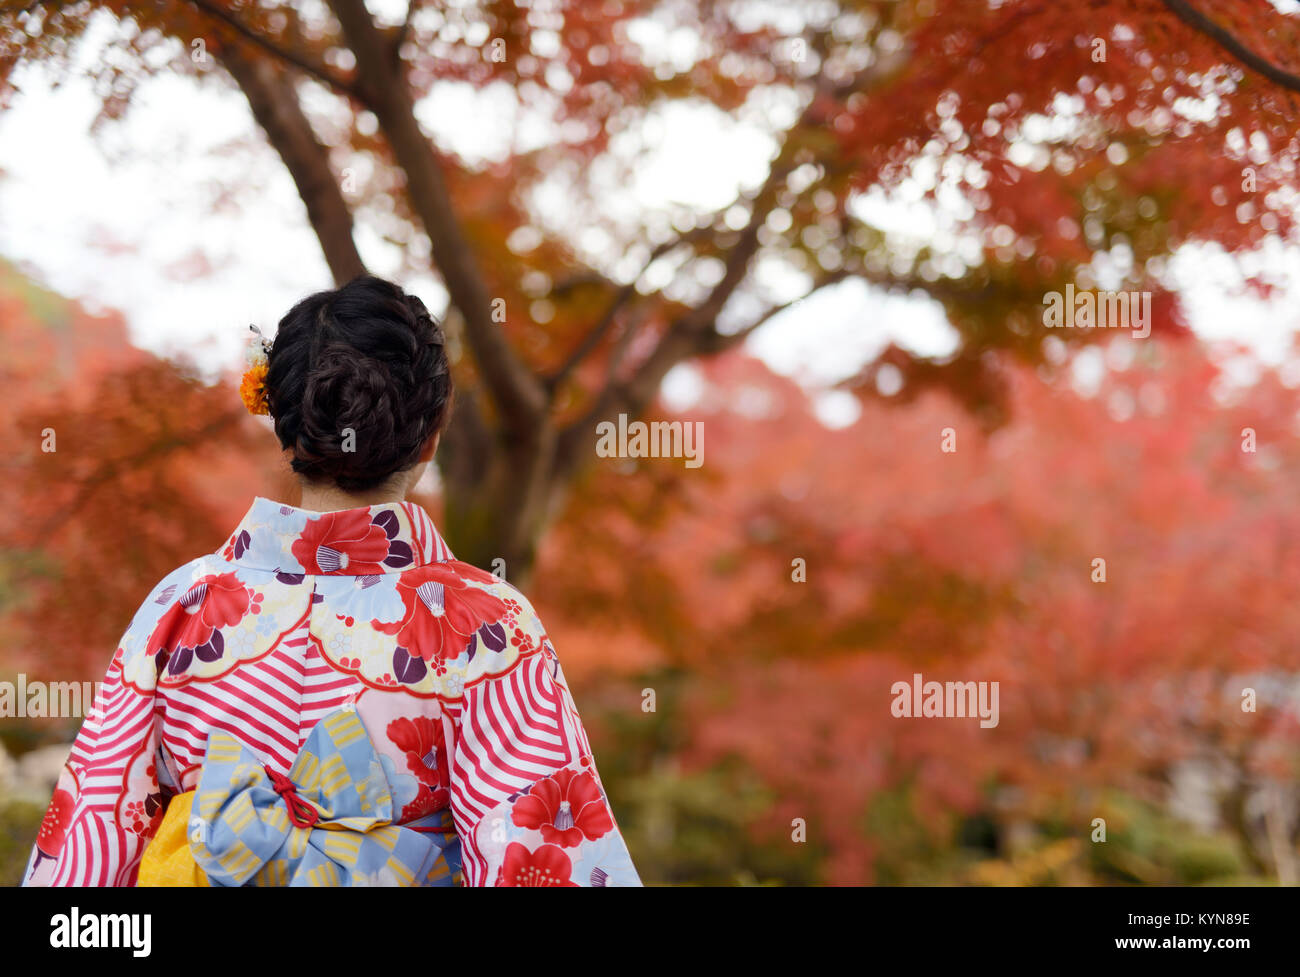 License and prints at MaximImages.com - Back of a Japanese woman wearing a colorful yukata kimono stainding in beautiful red autumn scenery in Kyoto, Stock Photo